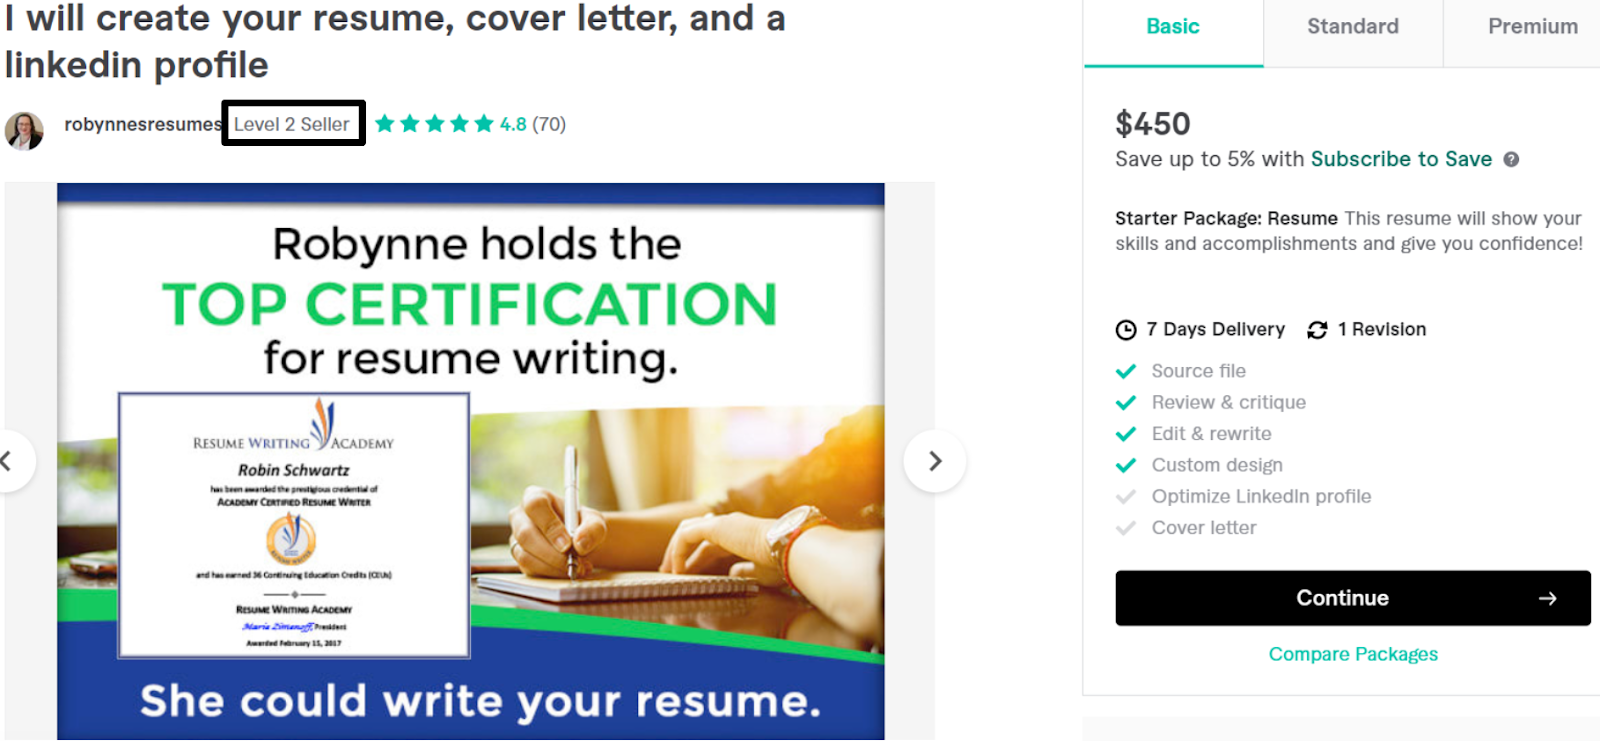 Robynneresumes' resume writing service gig on Fiverr